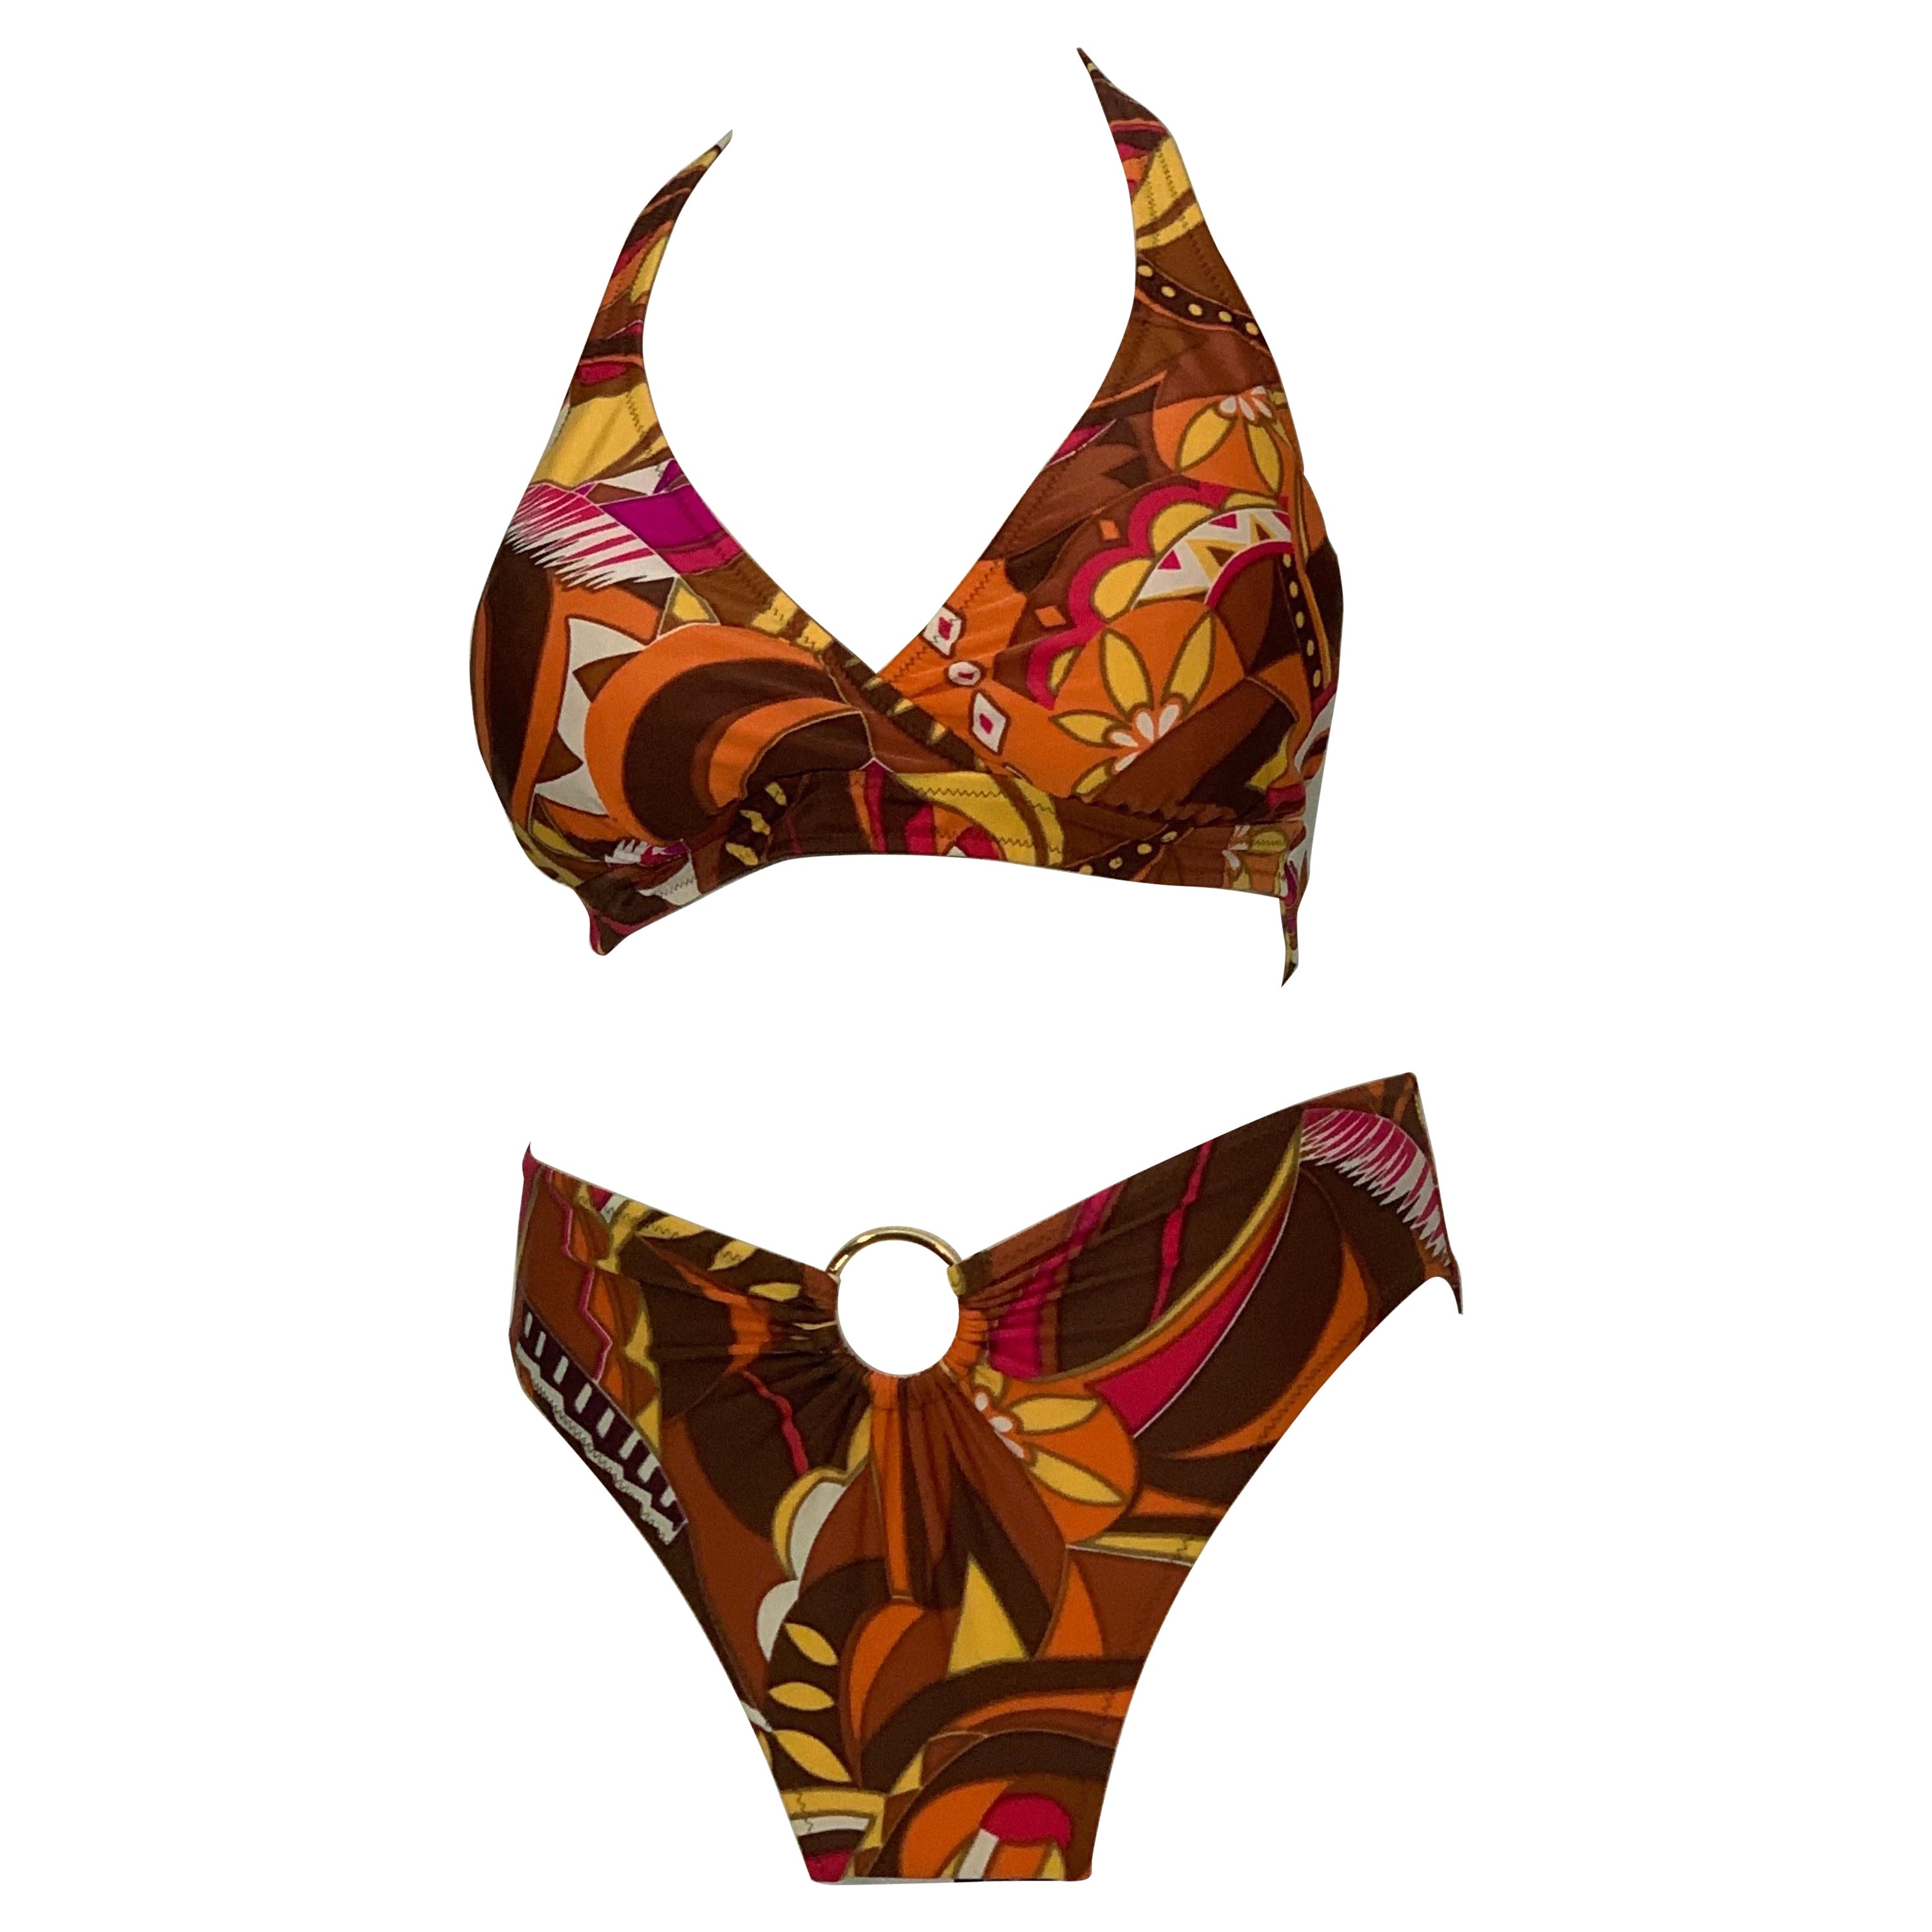 1970s Gottex Stylized Floral 2-Piece Bikini Swimsuit in Brown Copper and Orange